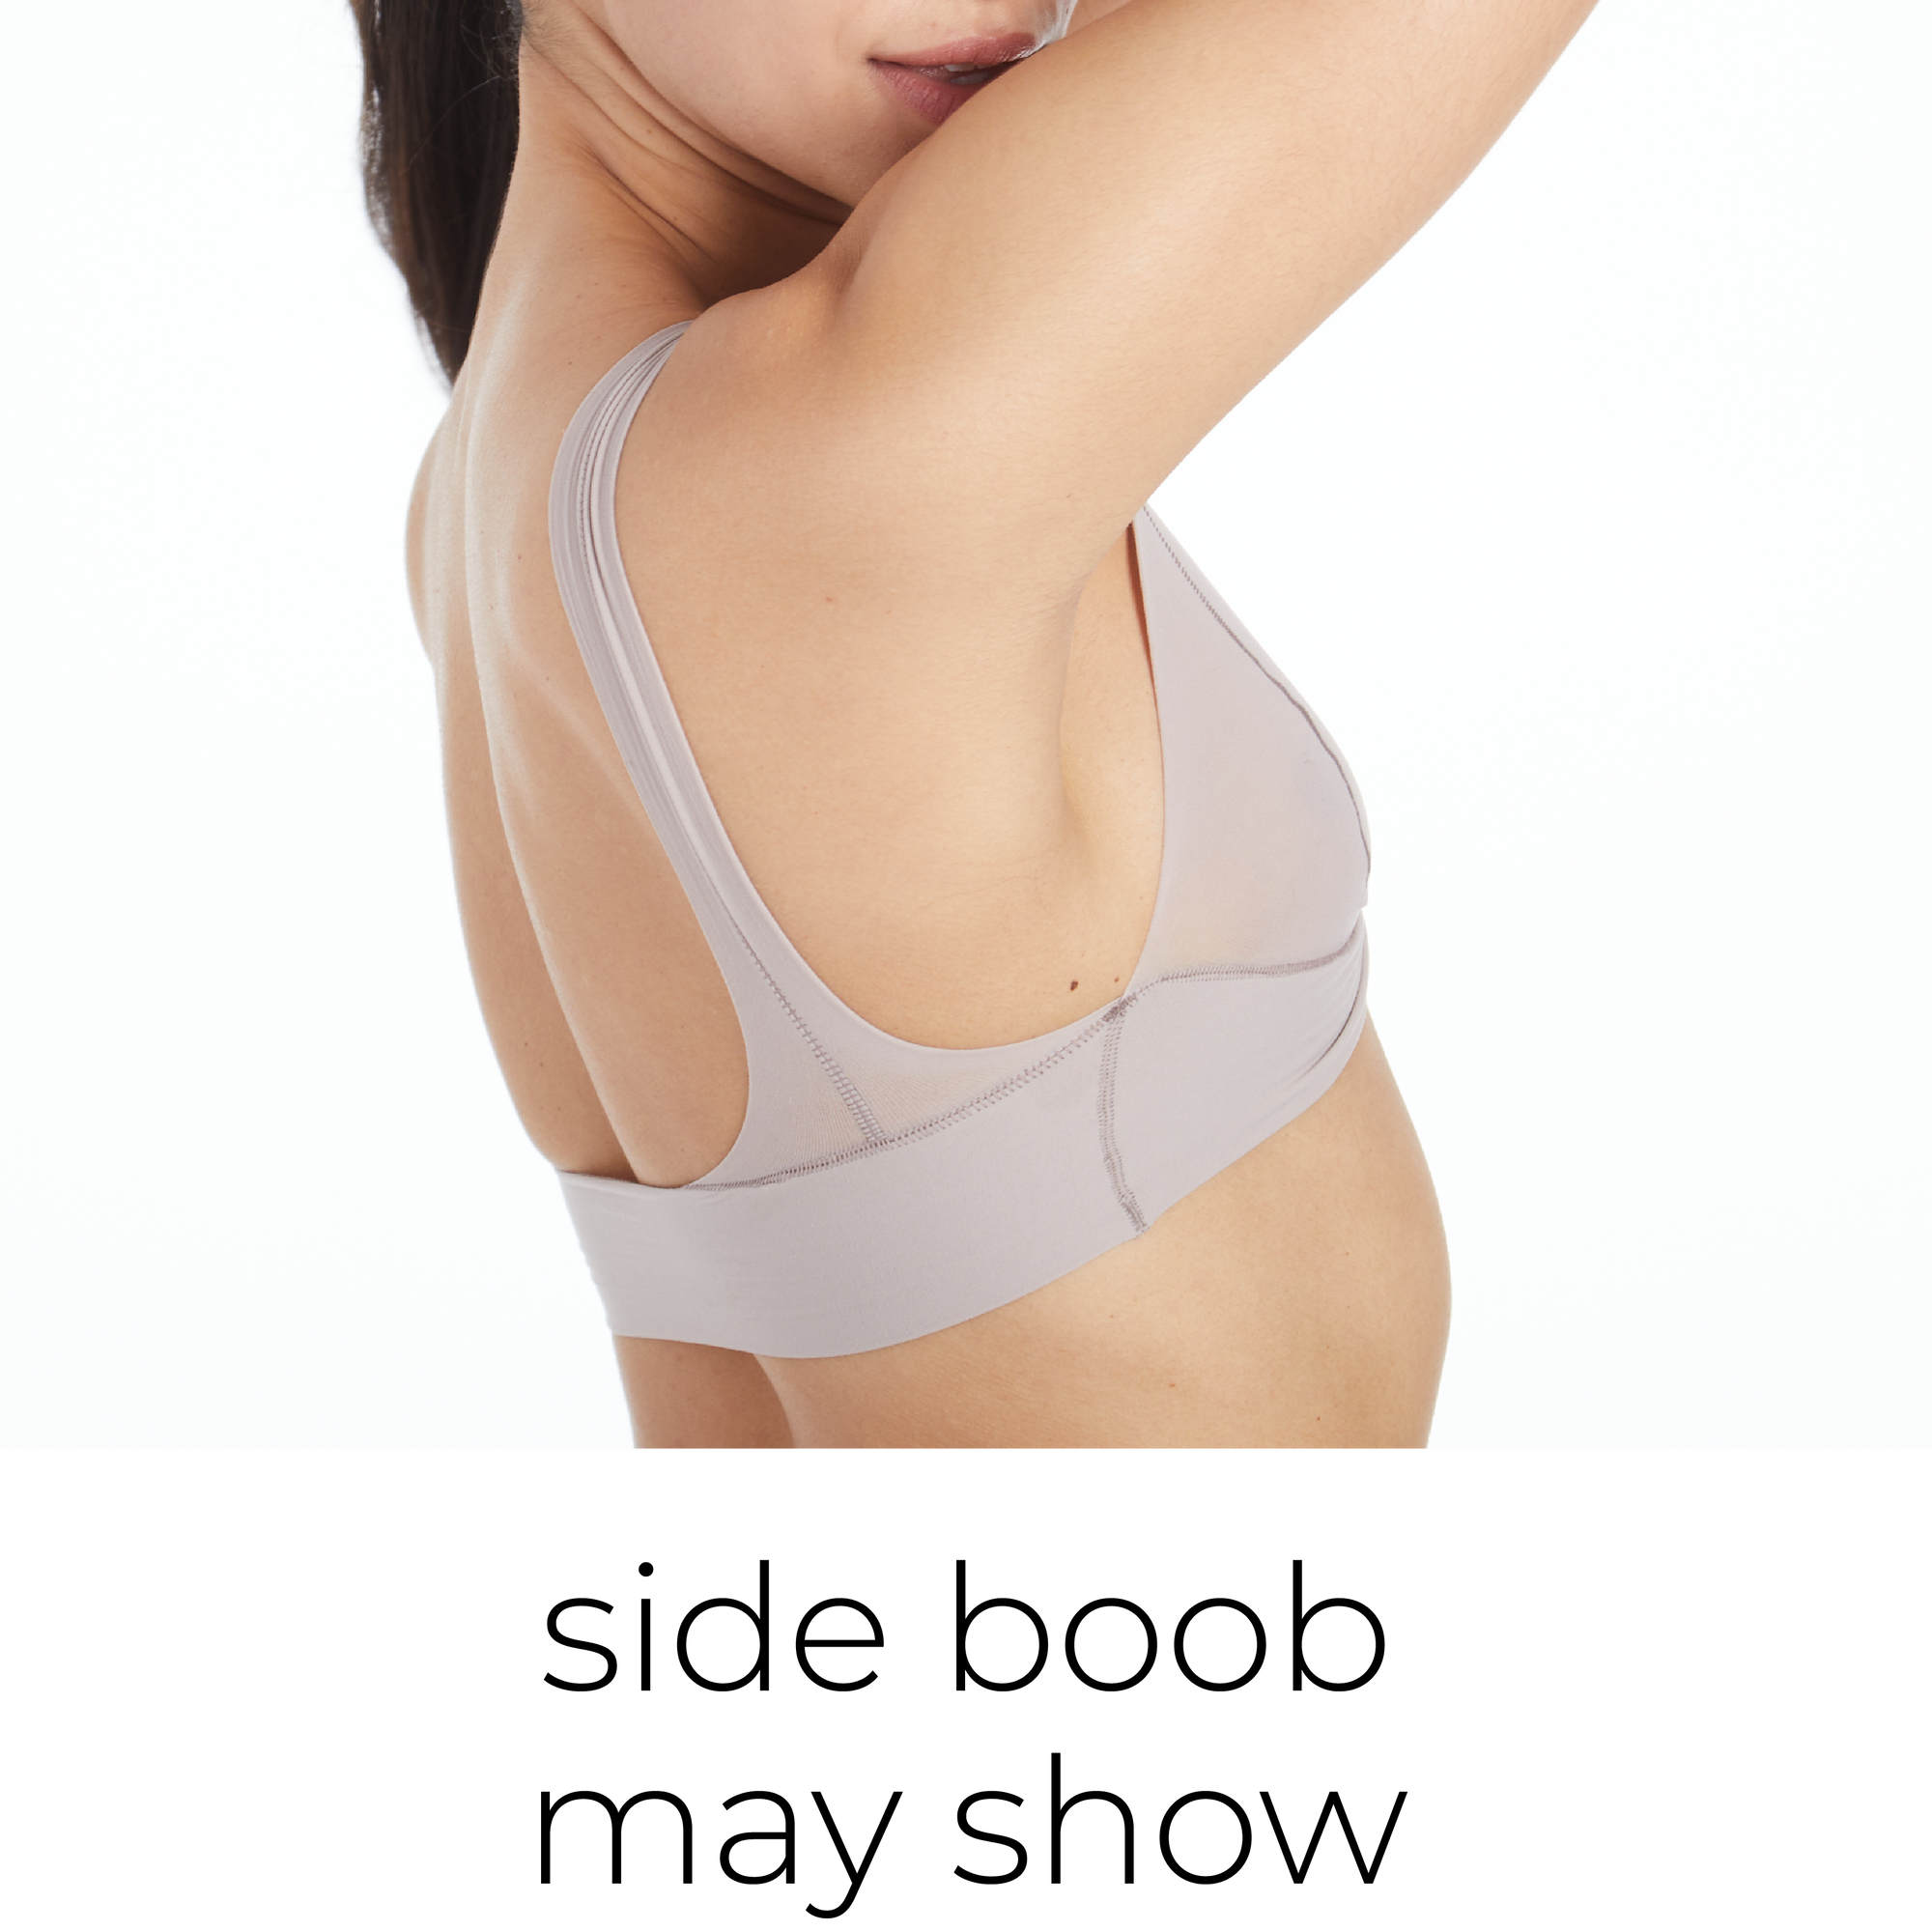 Side view of a woman wearing the Twist System in Dusk text: side boob may show